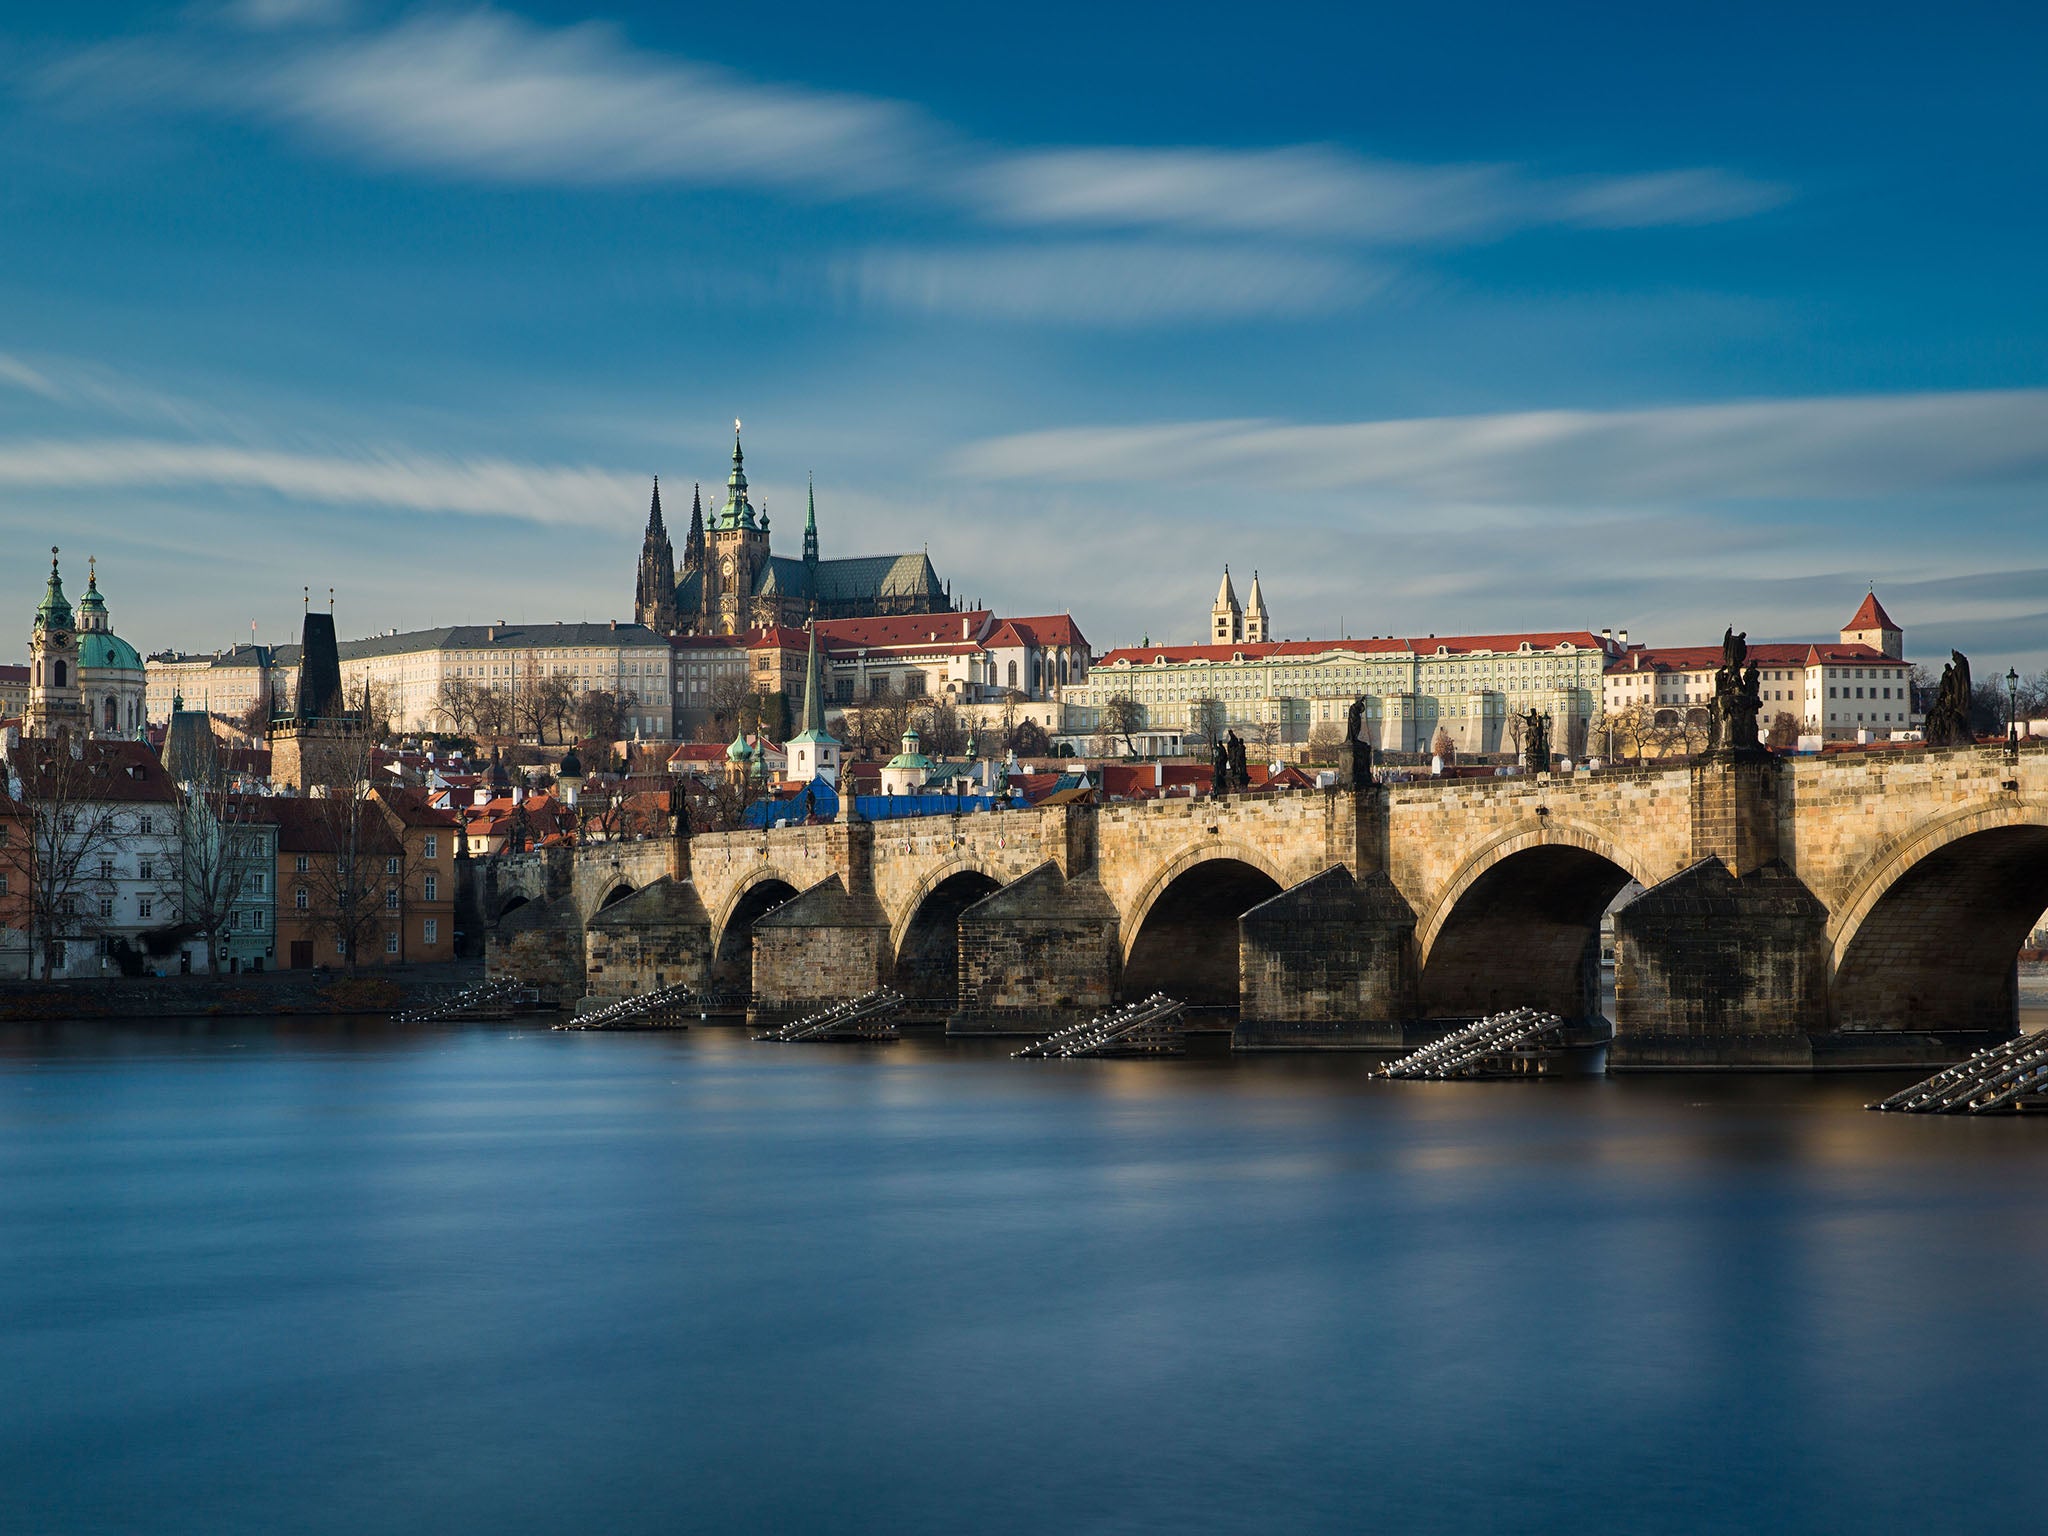 The Castle District, St Vitus Cathedral and the Charles Bridge over the Vltava river